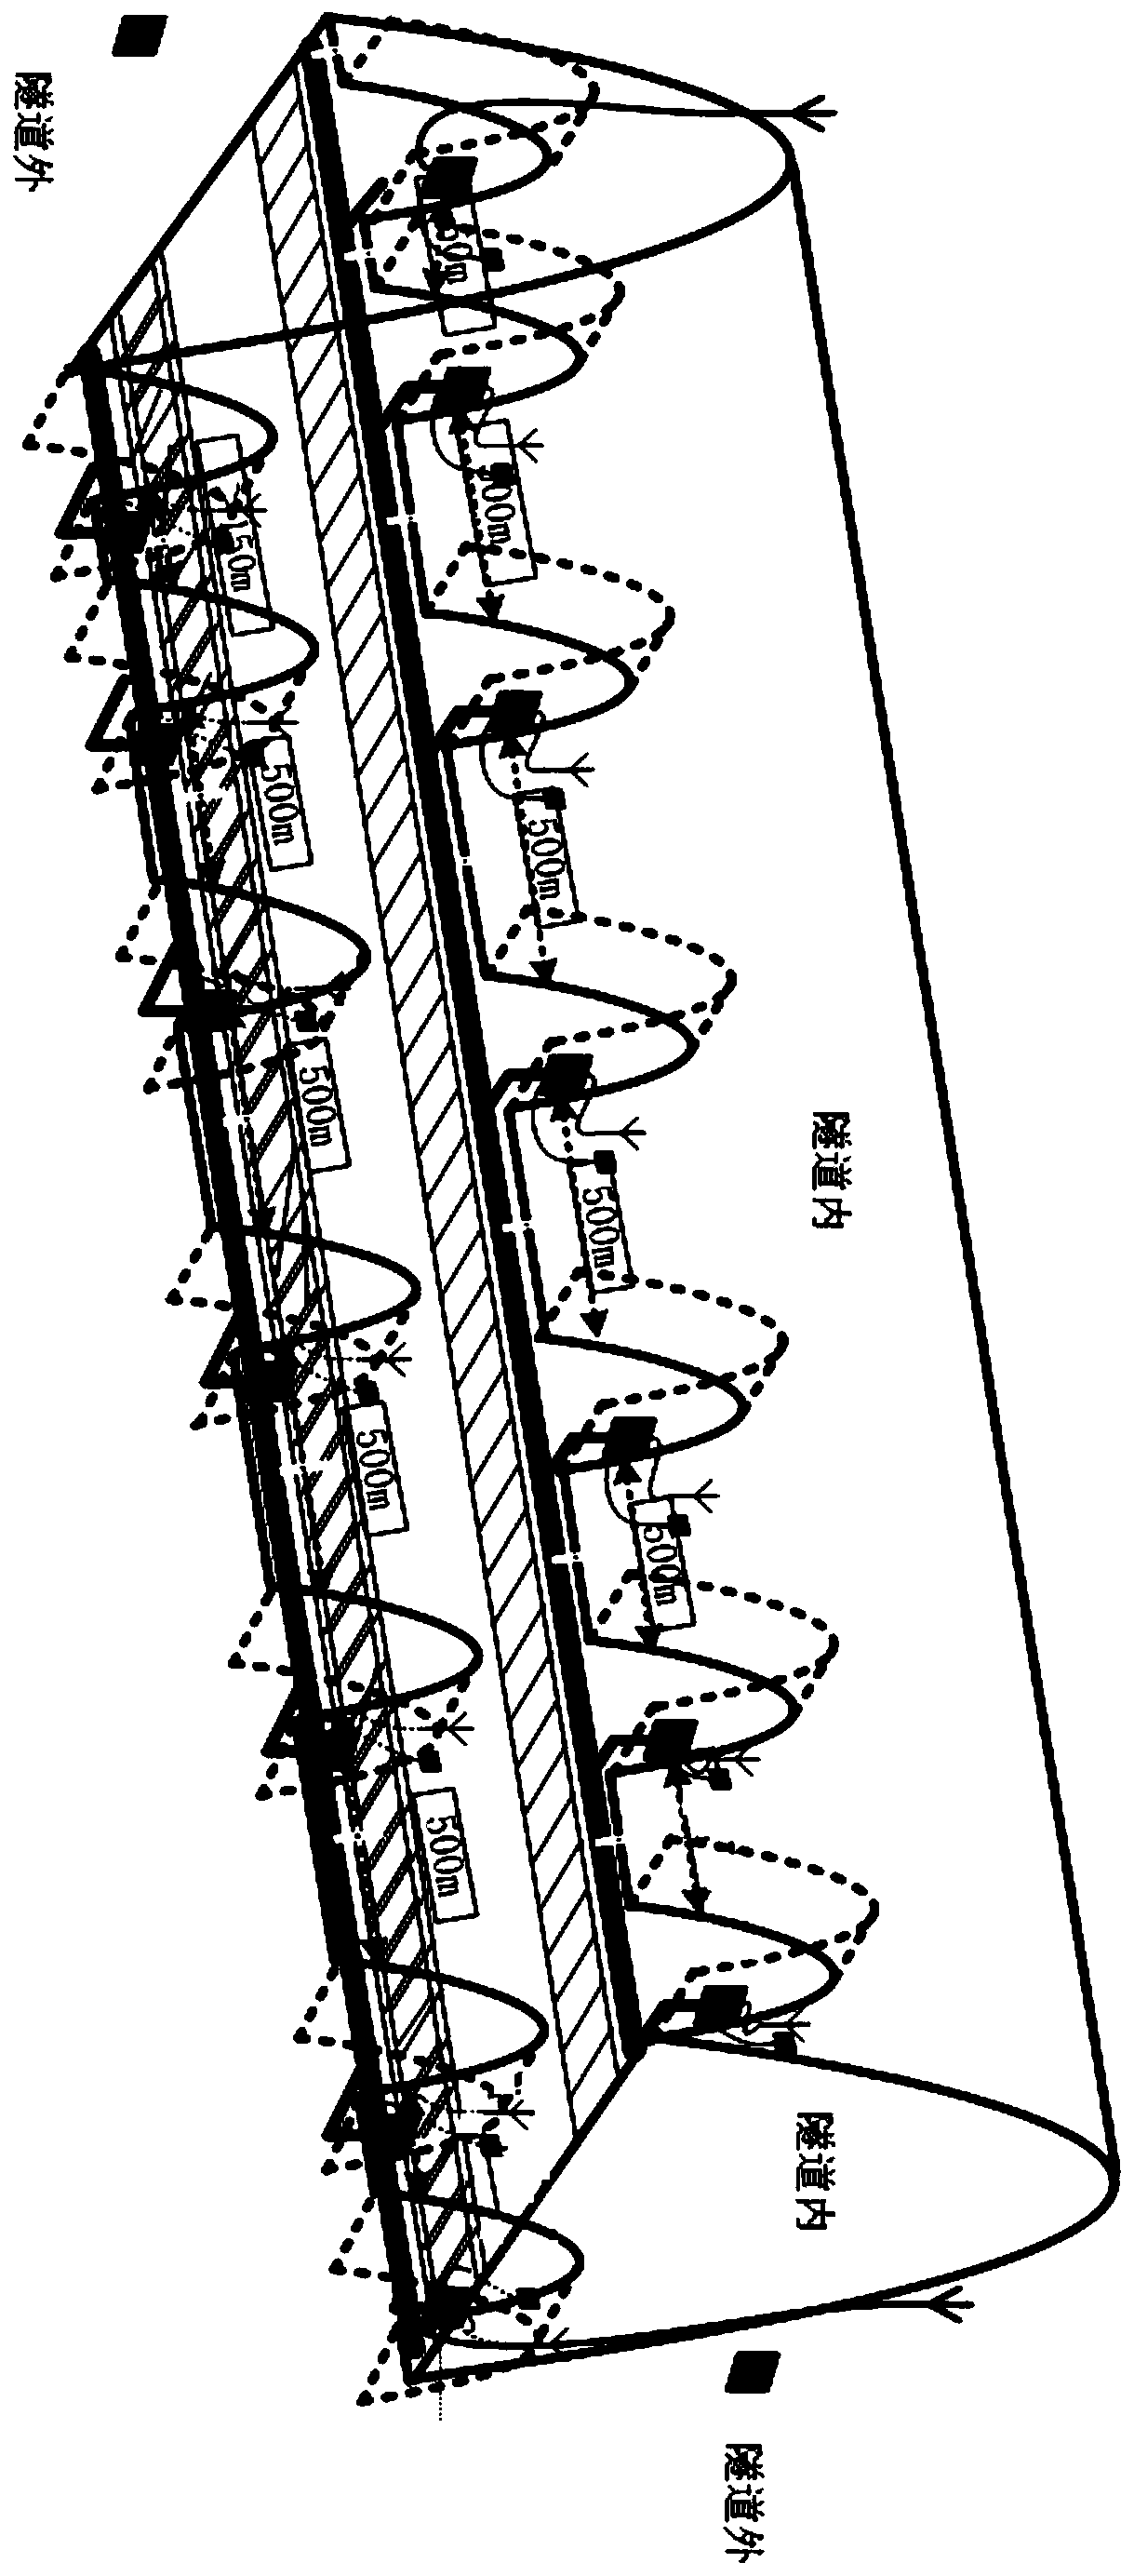 Beidou tunnel coverage system and layout method